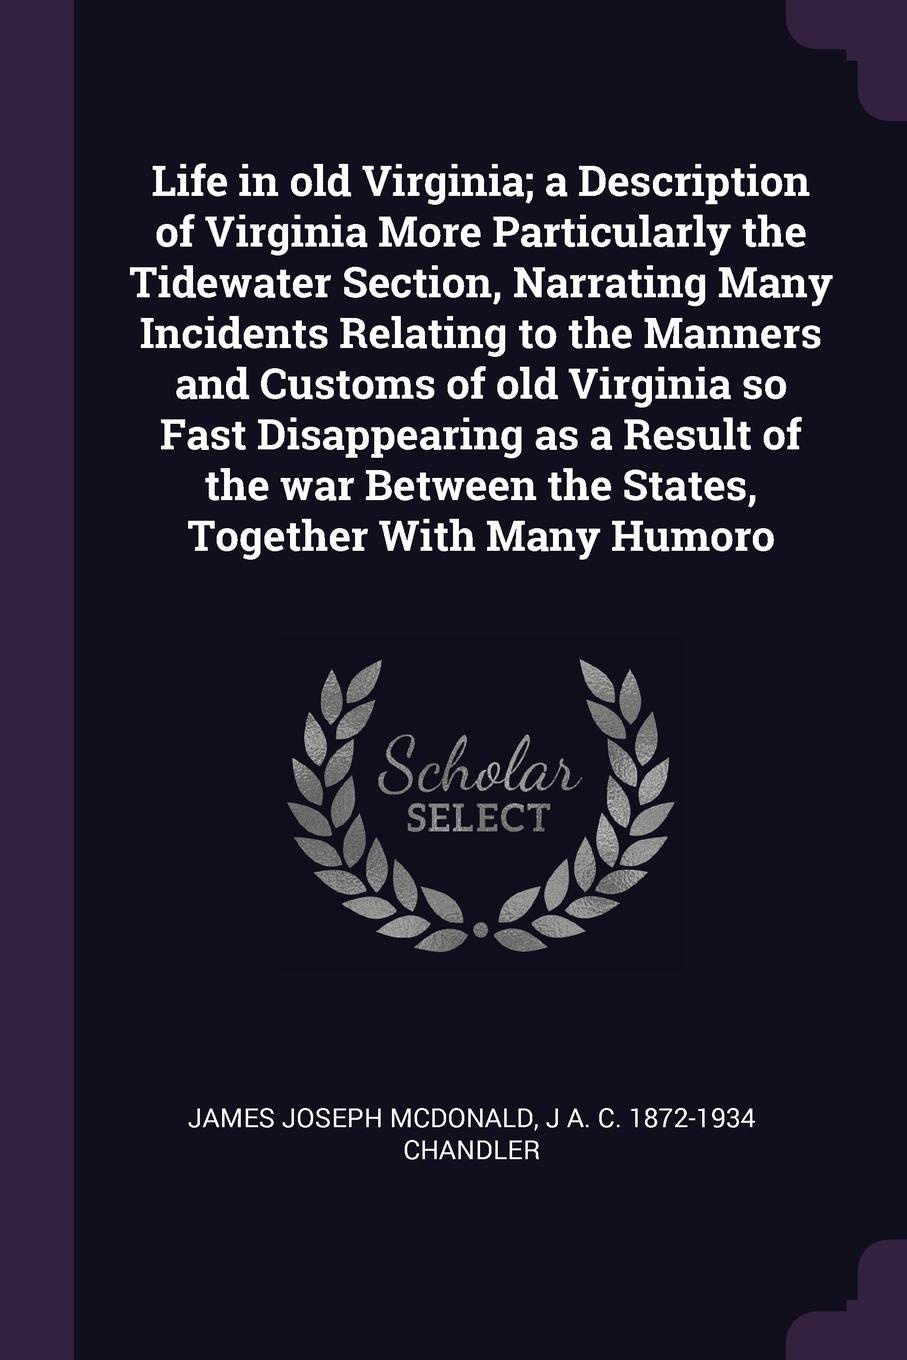 Life in old Virginia; a Description of Virginia More Particularly the Tidewater Section, Narrating Many Incidents Relating to the Manners and Customs of old Virginia so Fast Disappearing as a Result of the war Between the States, Together With Man...